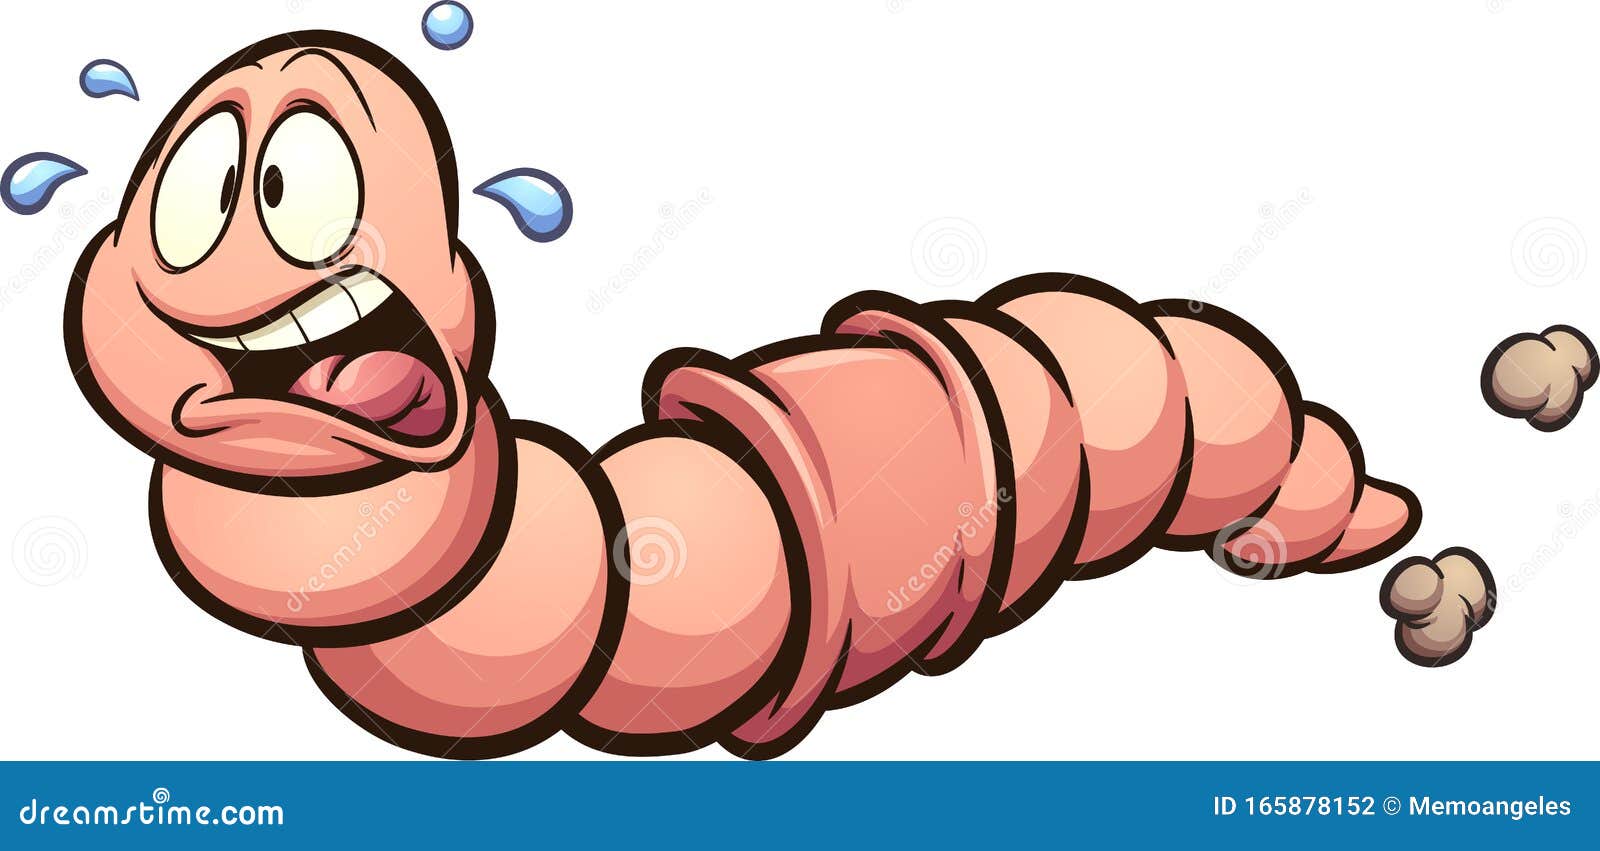 https://thumbs.dreamstime.com/z/earthworm-running-cartoon-scared-sweating-clip-art-vector-illustration-simple-gradients-all-single-layer-165878152.jpg